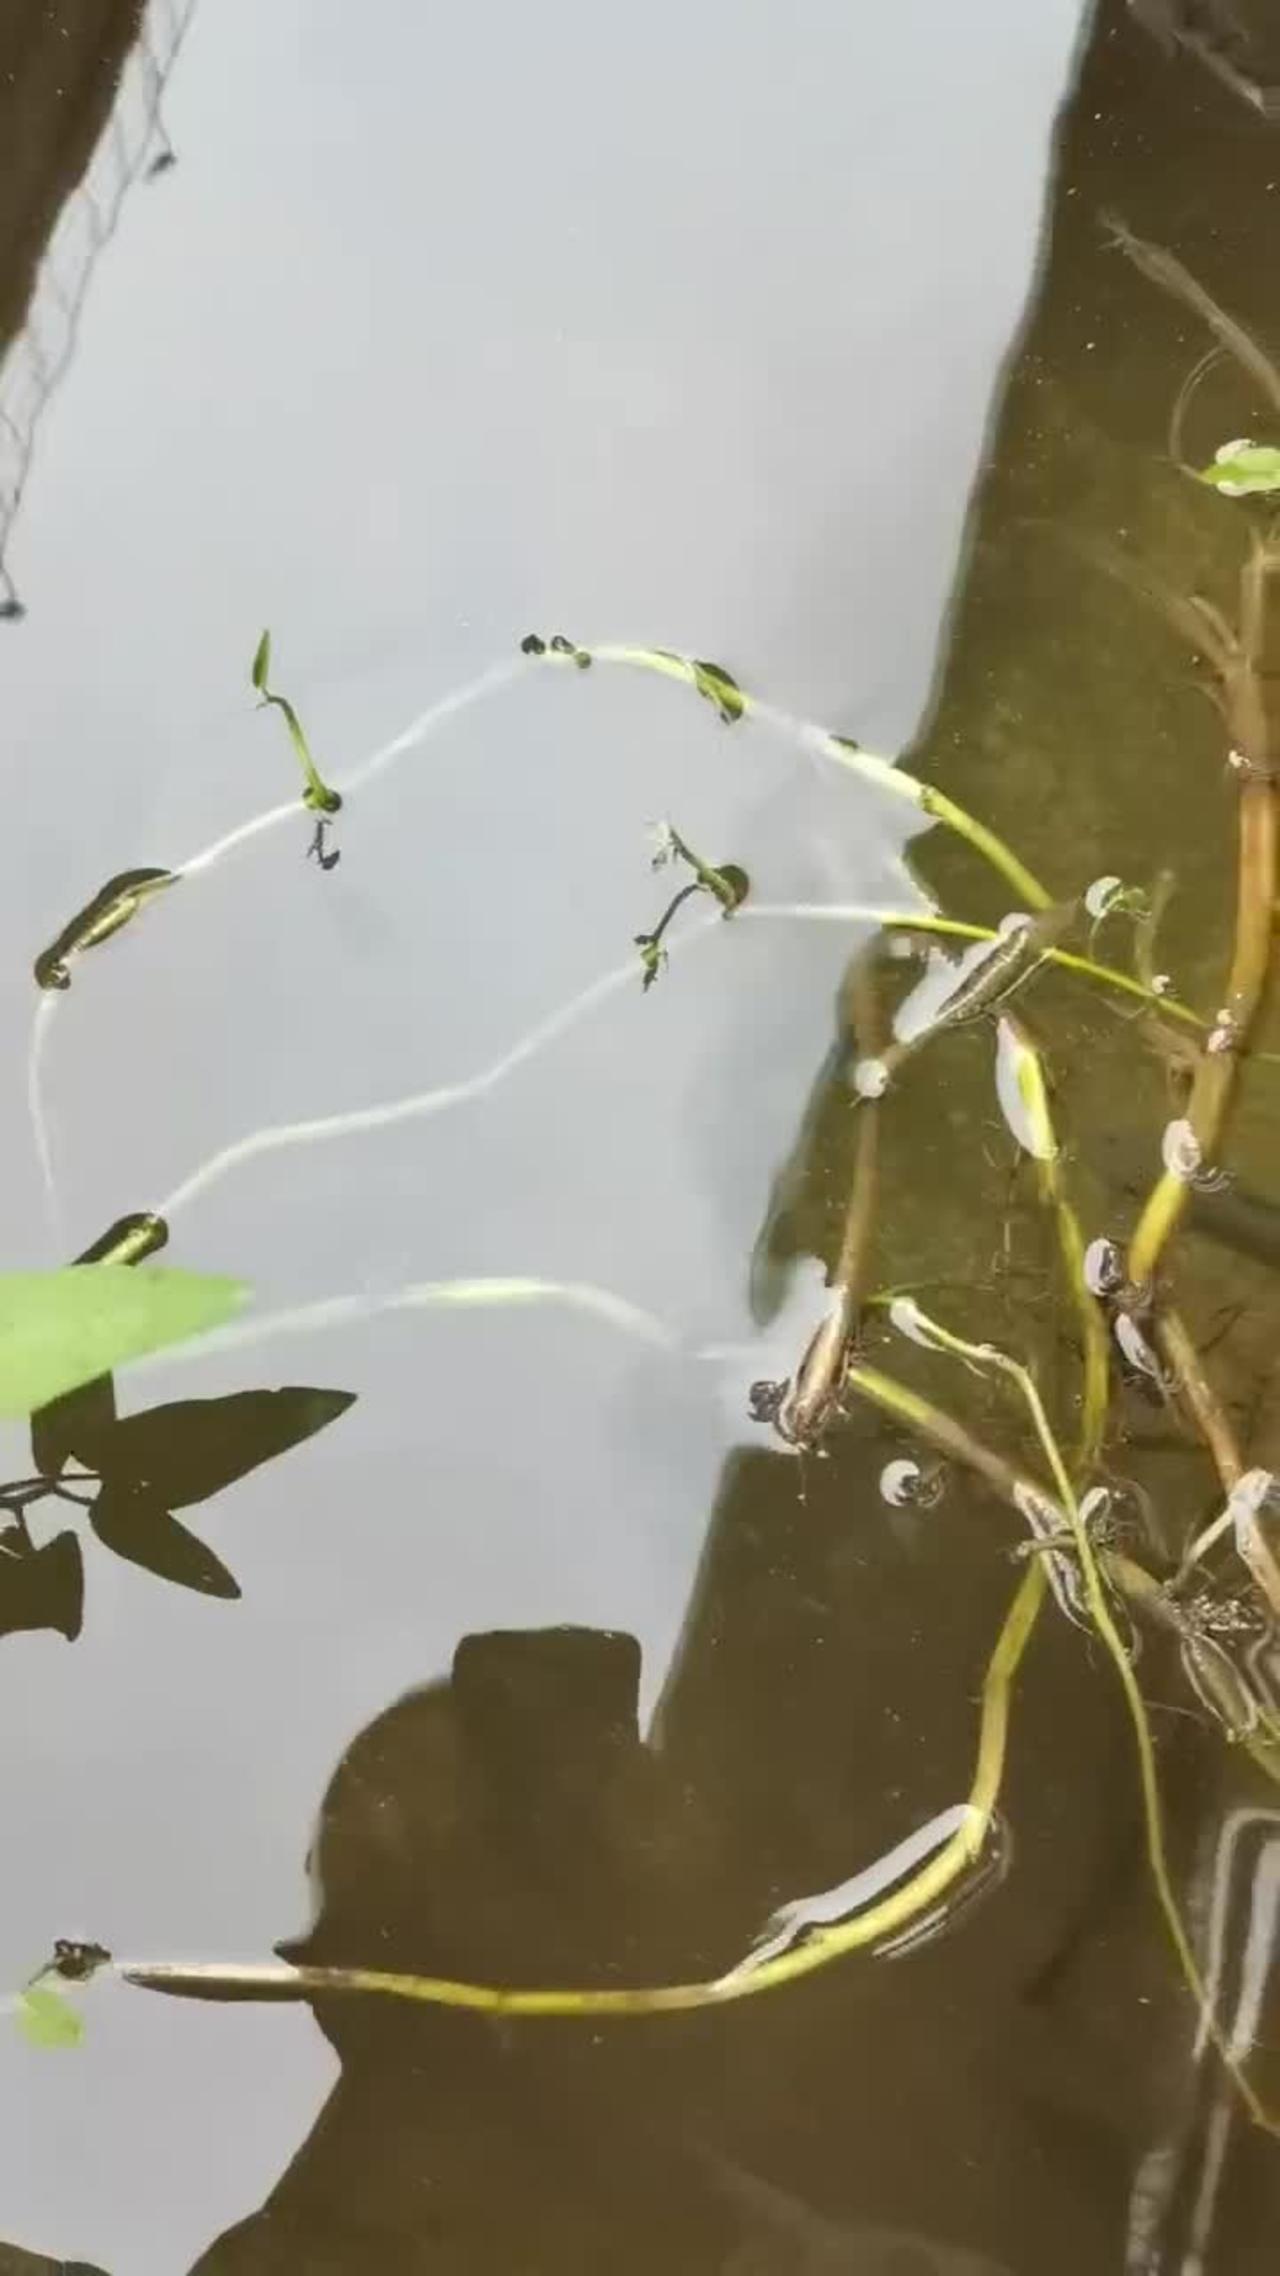 Small fish swimming in the pond,